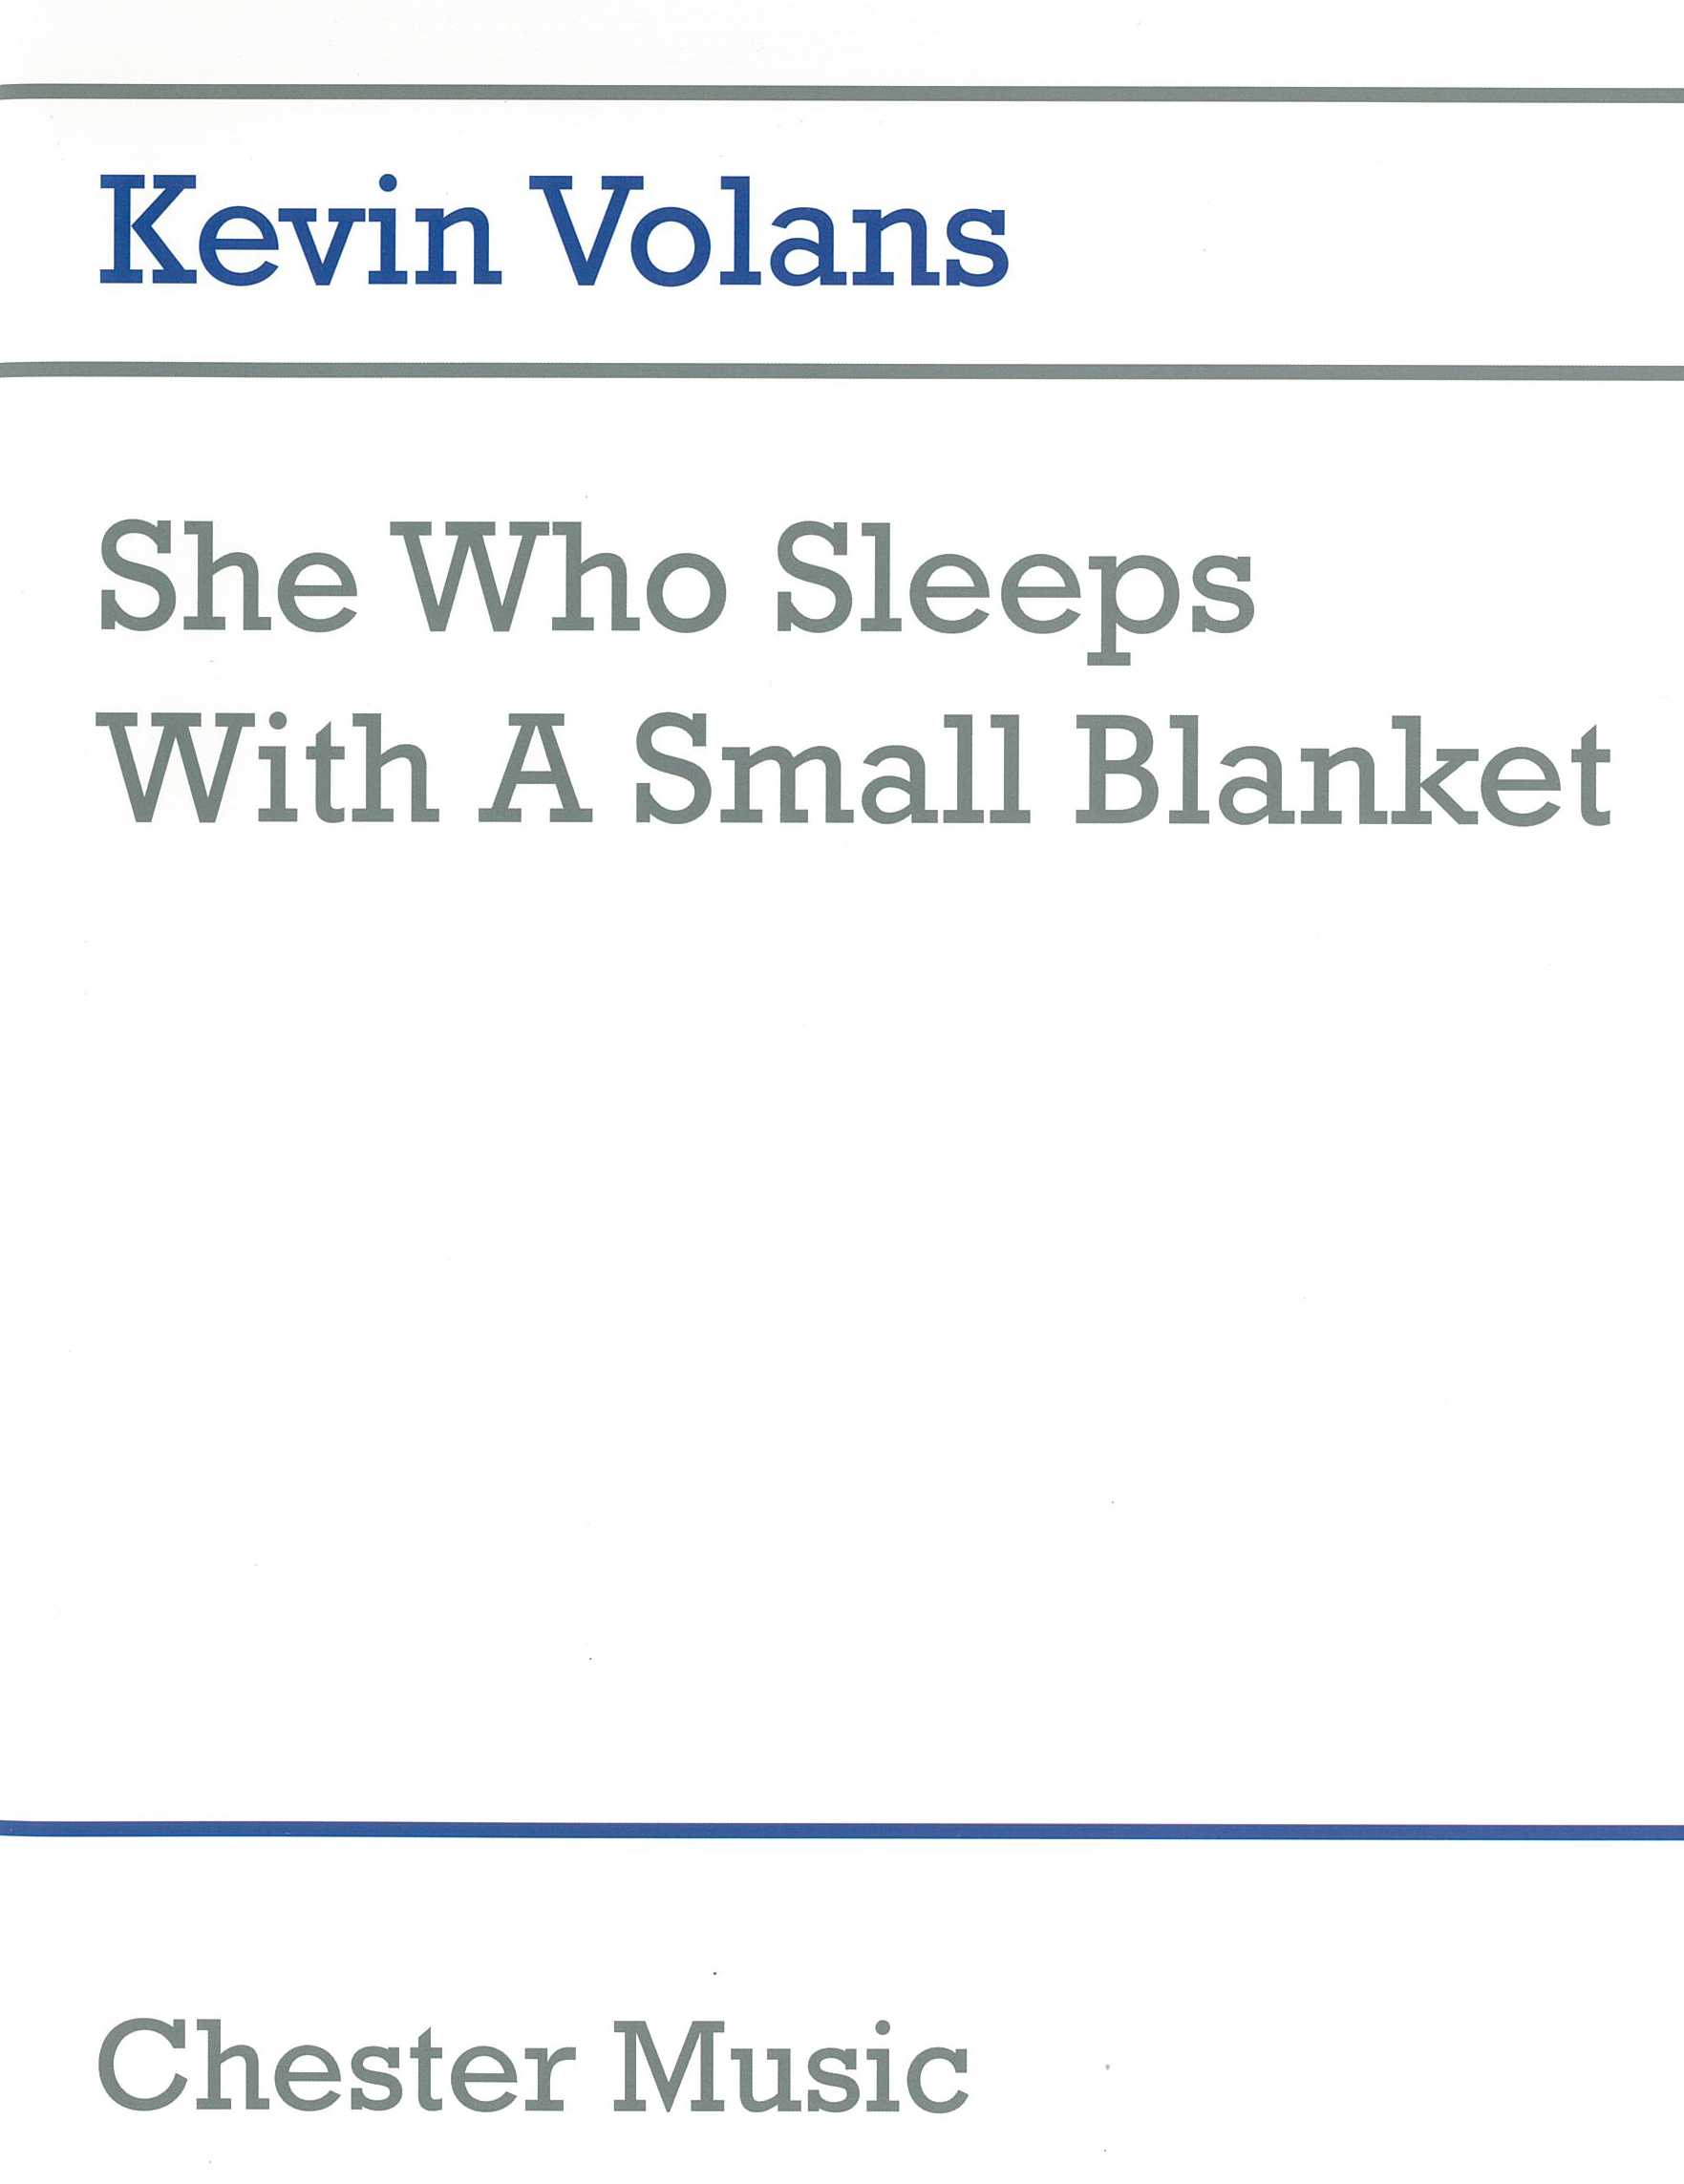 Kevin Volans: She Who Sleeps with a Small Blanket